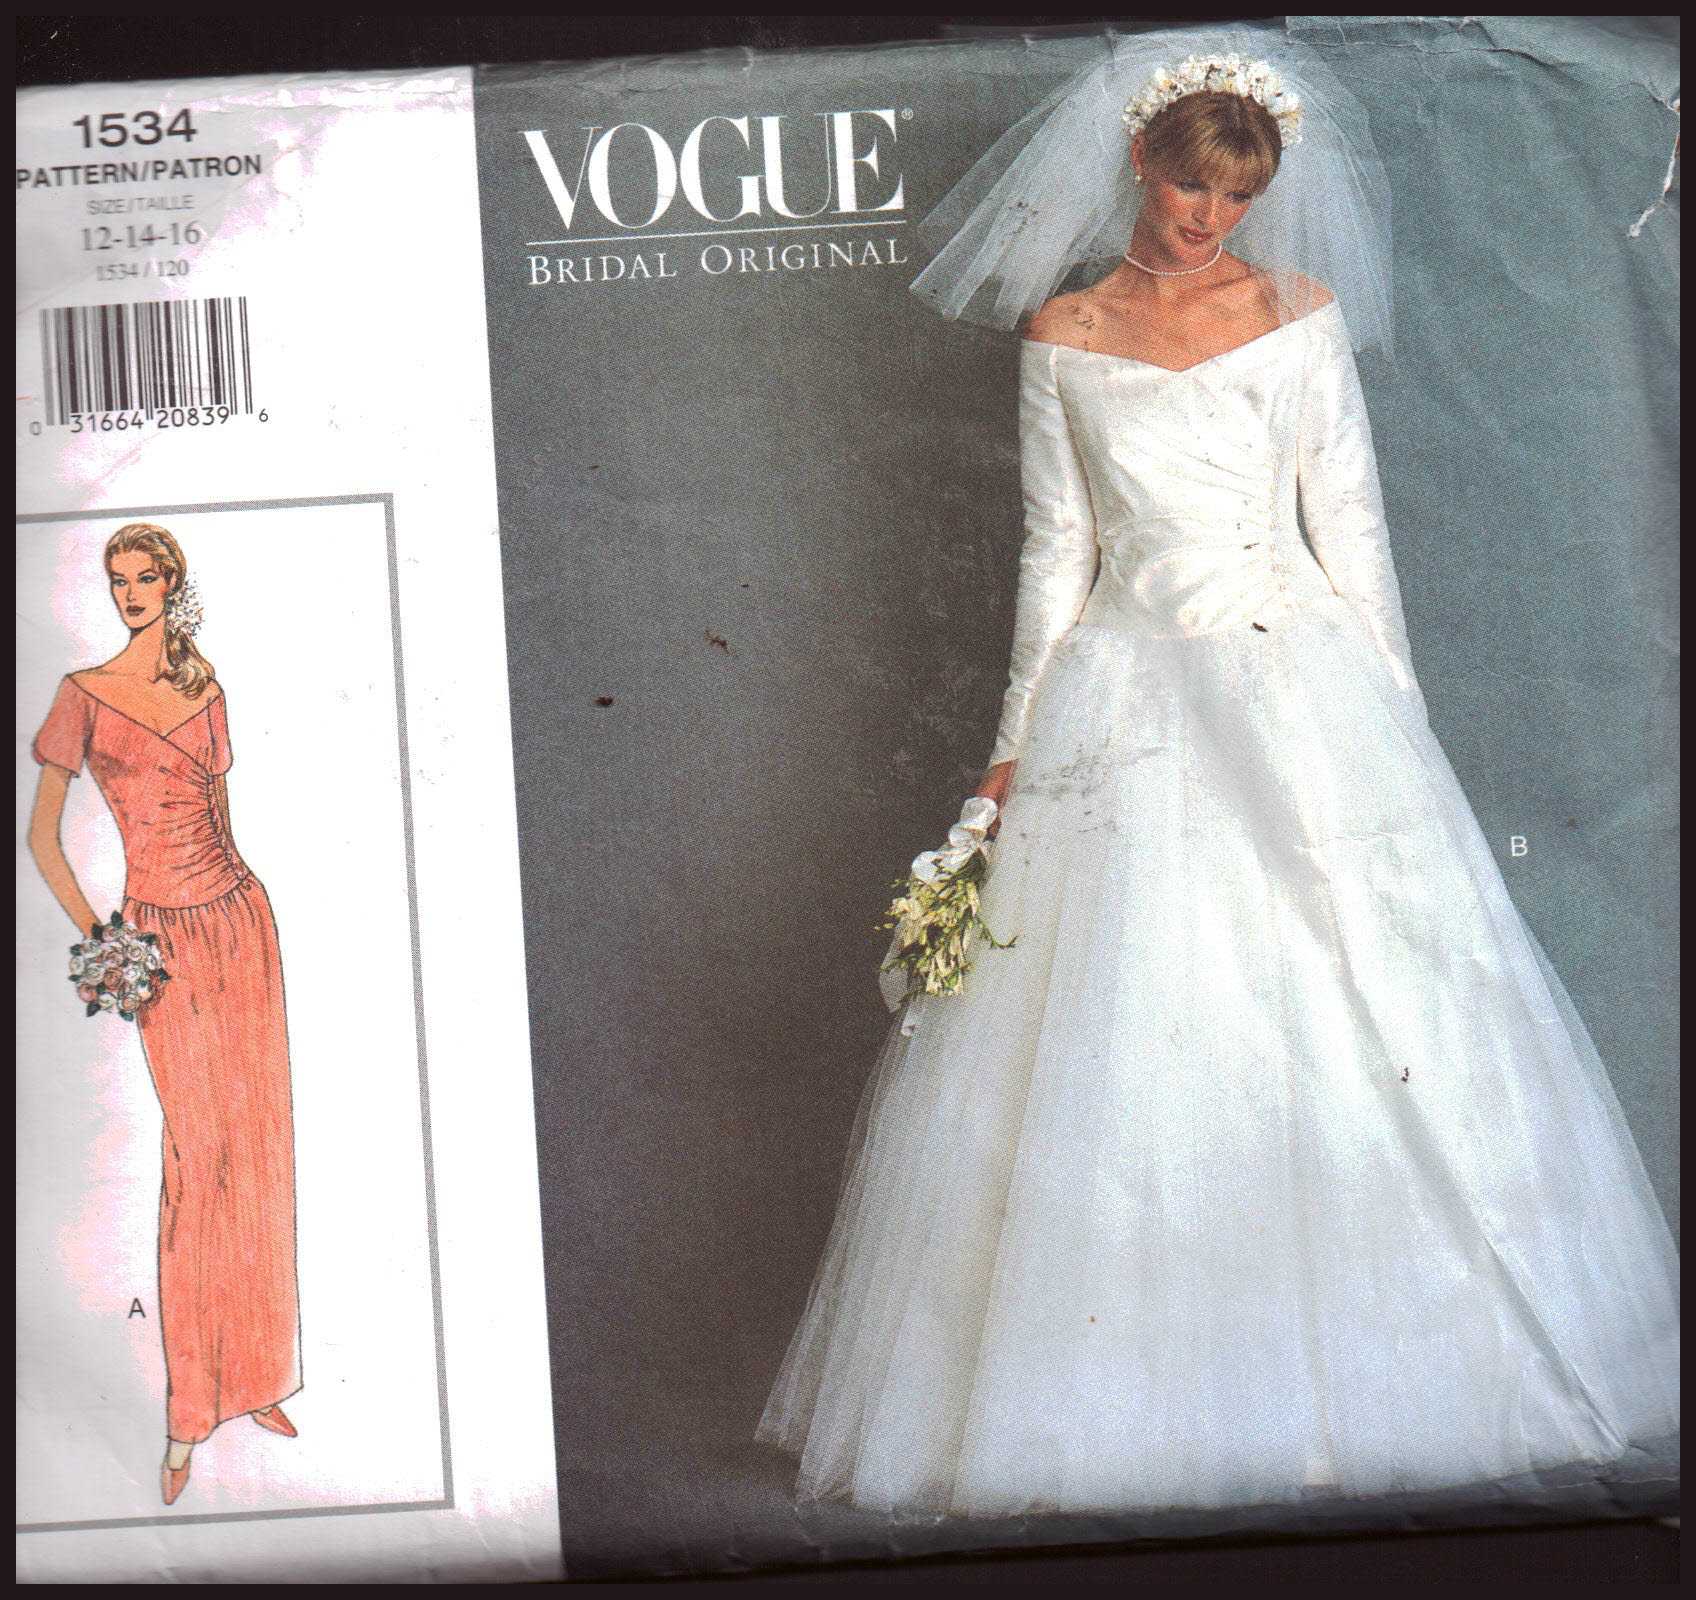 Belleville Sassoon Bridal Gown Pattern-12-14-16 Vogue 1535 [1535] - $25.00  : The Vintage Cache, sewing, needlework, collectibles